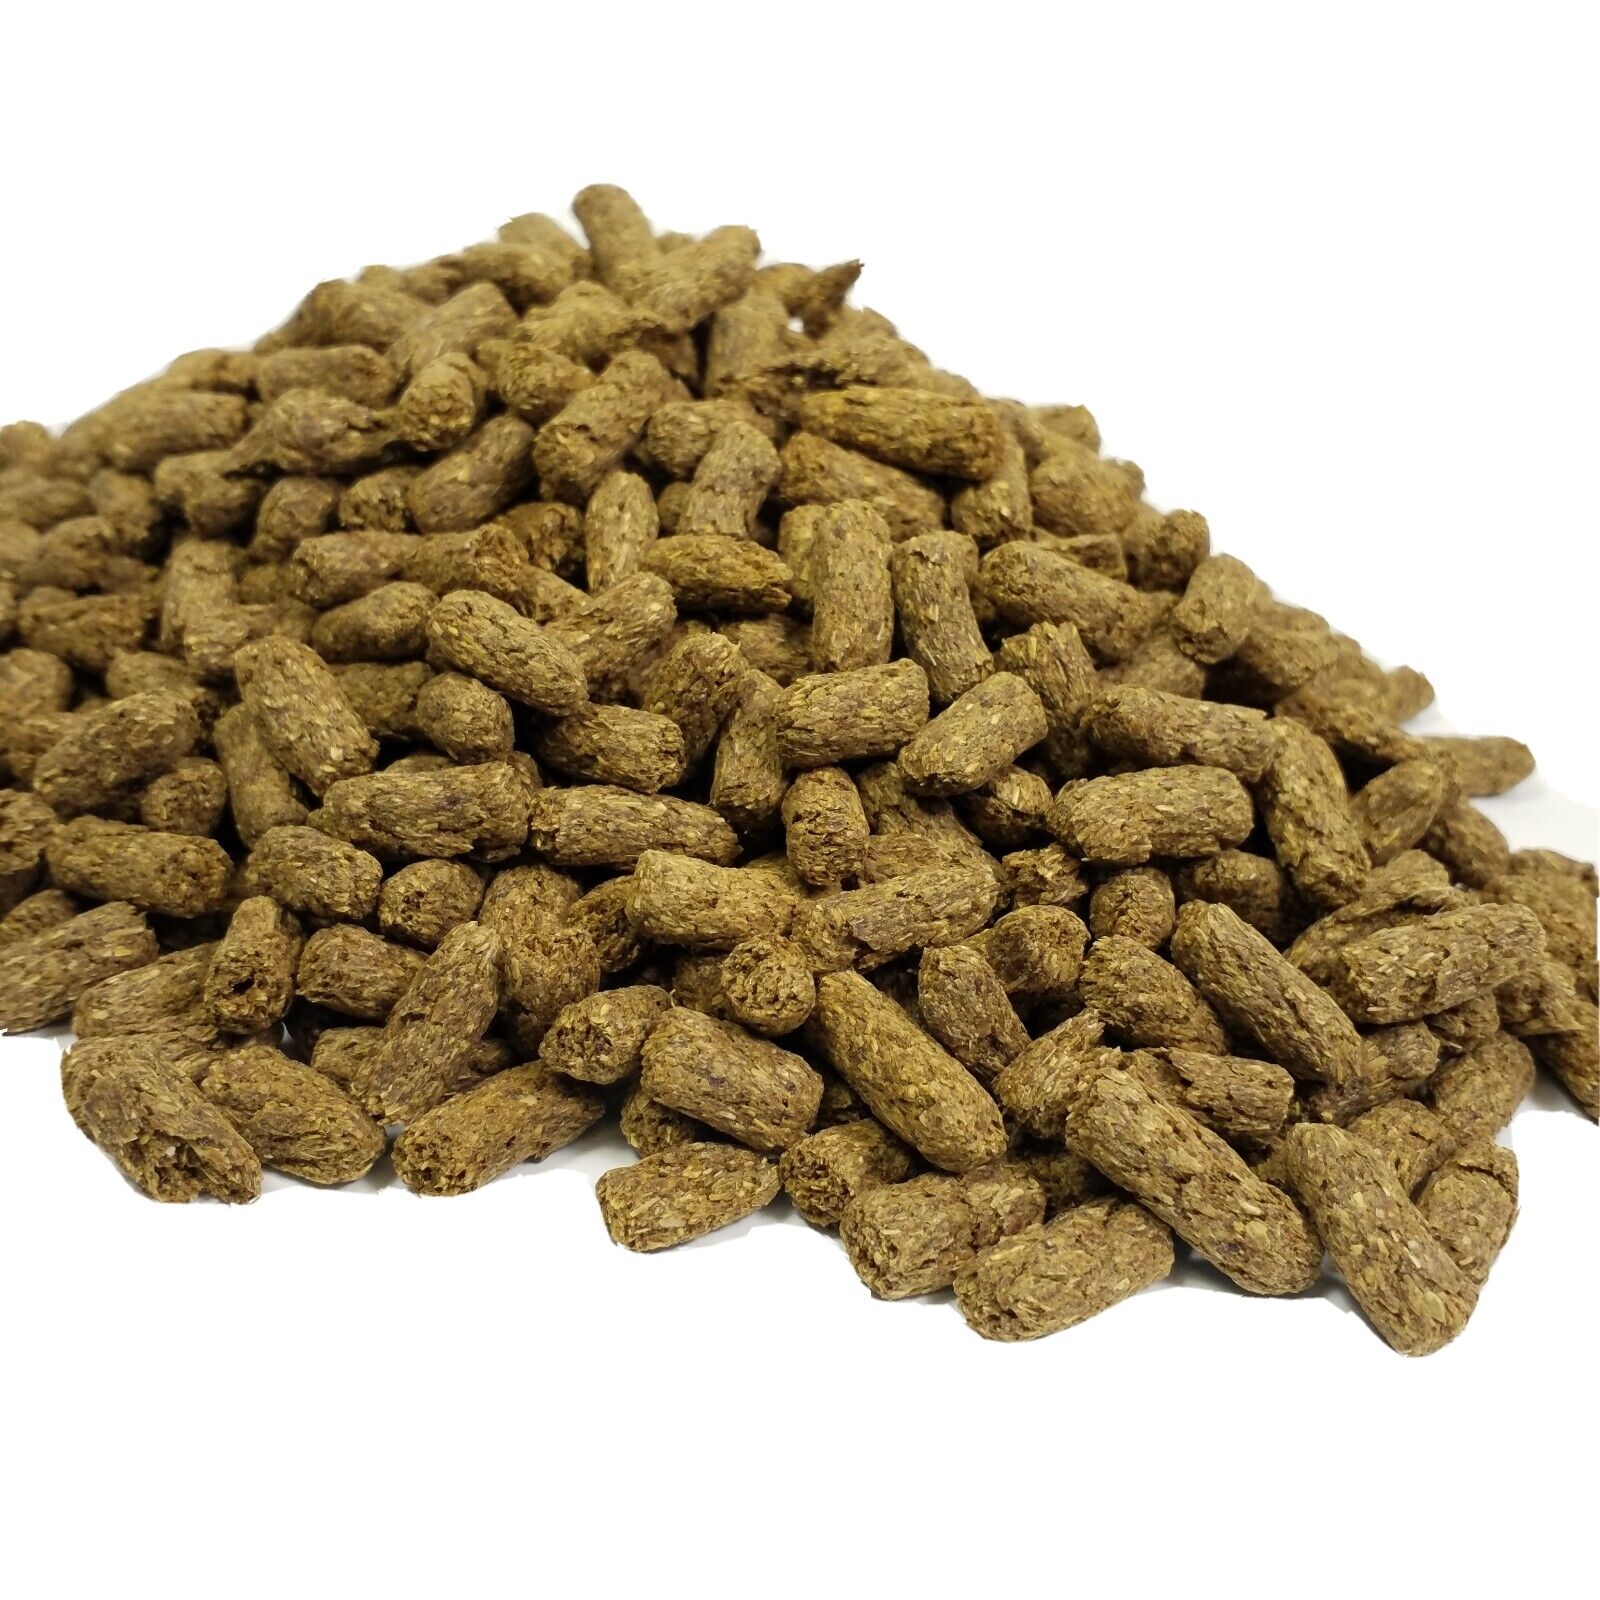 Tortoise Pellet Food, LS (Low Starch) High Fiber Diet for ALL To